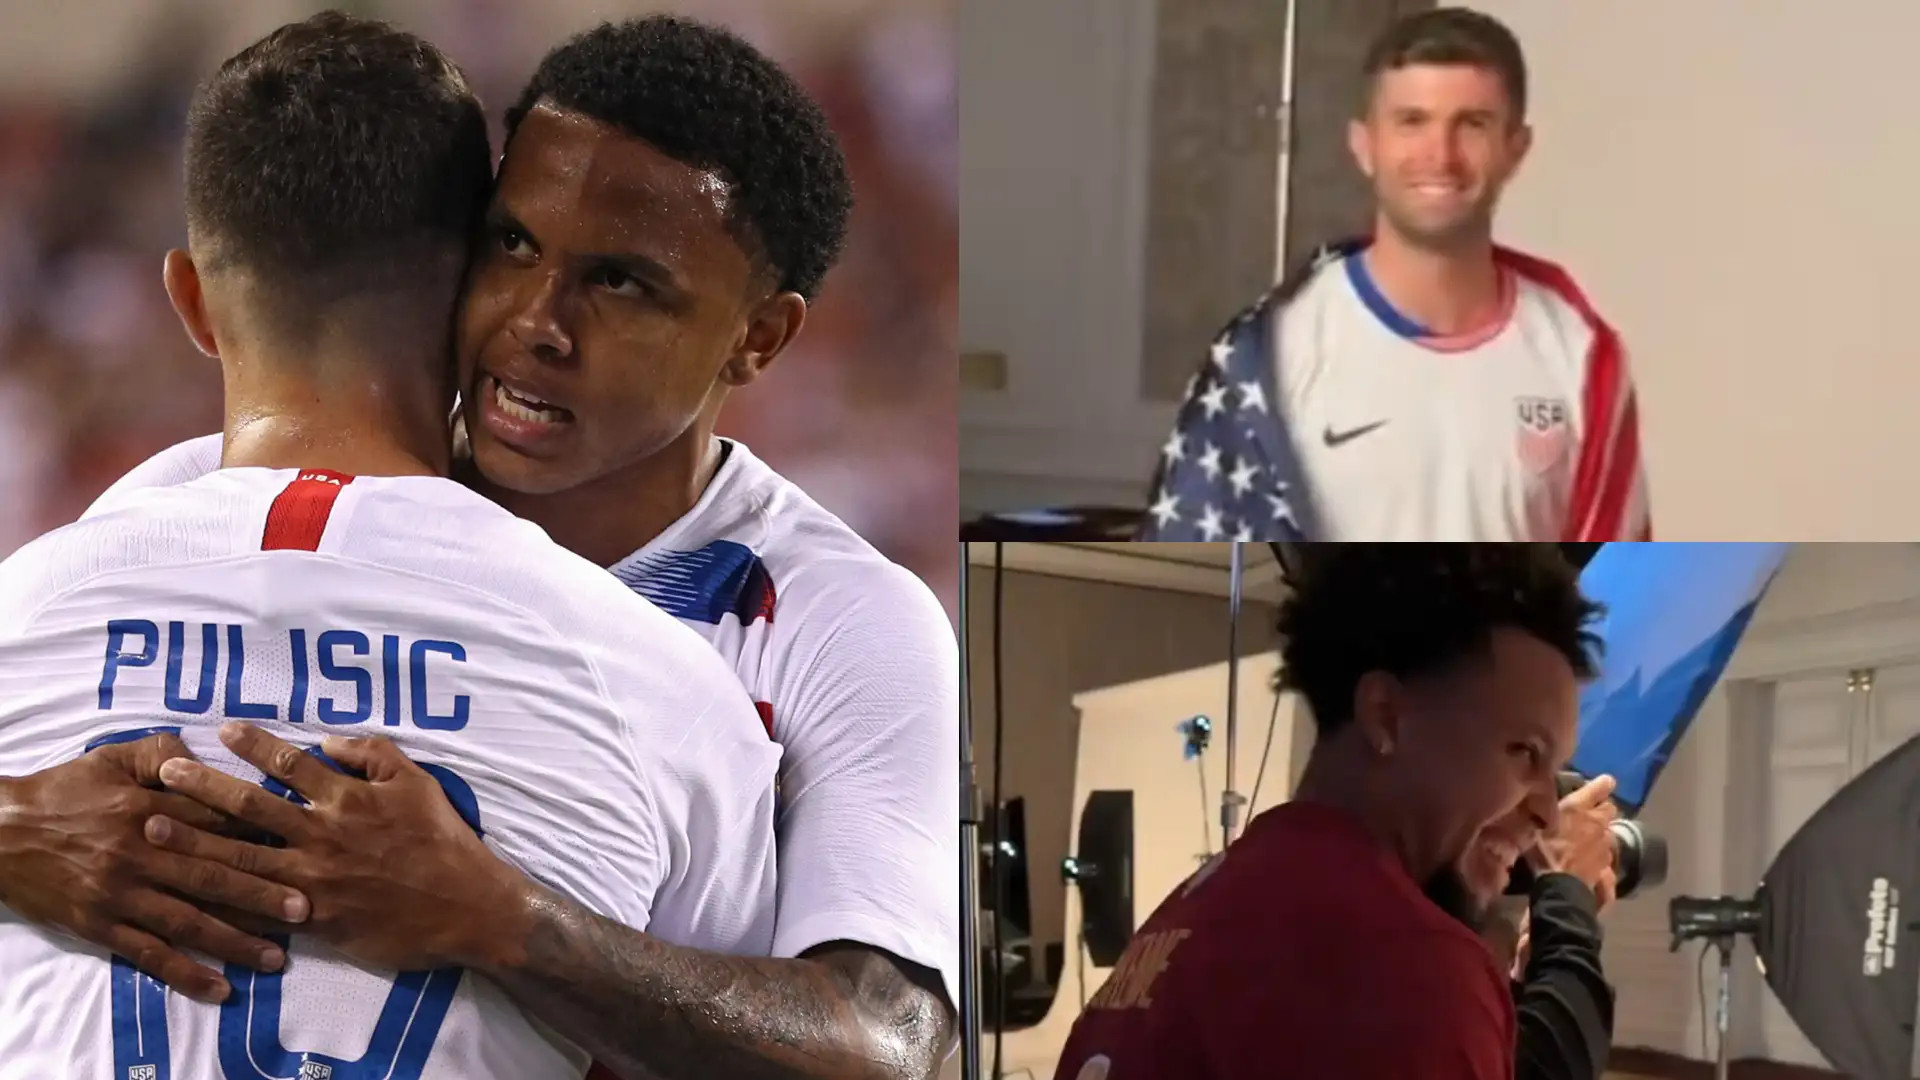 VIDEO: ‘This is ridiculous!’ – Christian Pulisic can’t keep straight face after Weston McKennie gatecrashes USMNT photoshoot ahead of Copa America